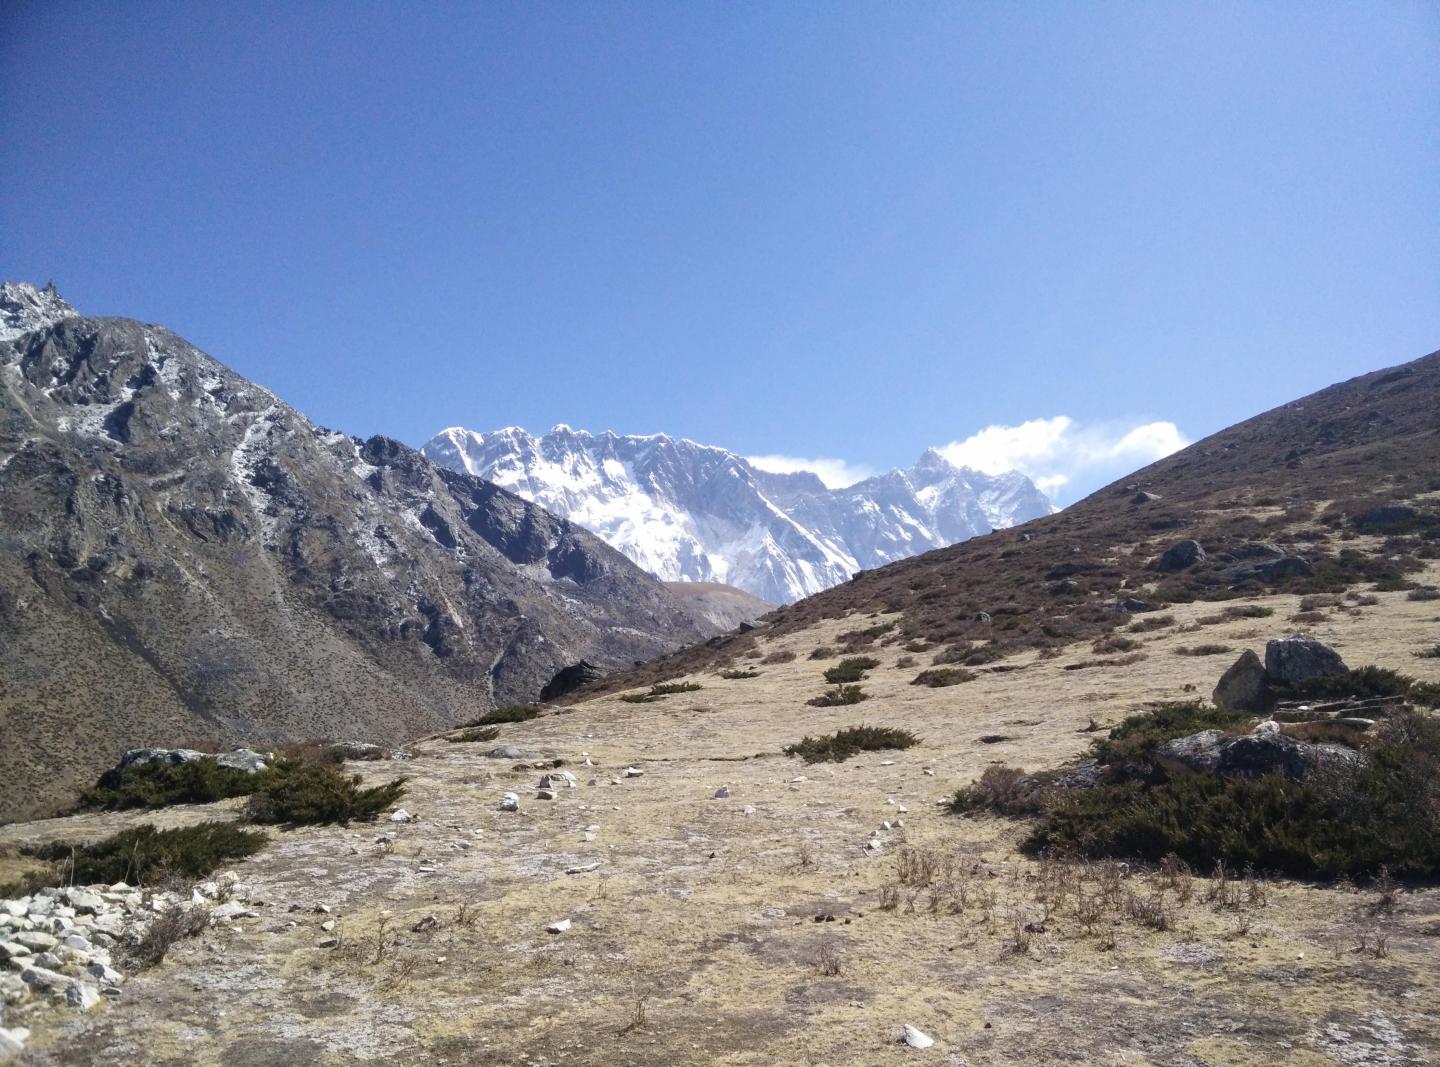 Subnival Vegetation in the Himalayan Region (3 of 3)